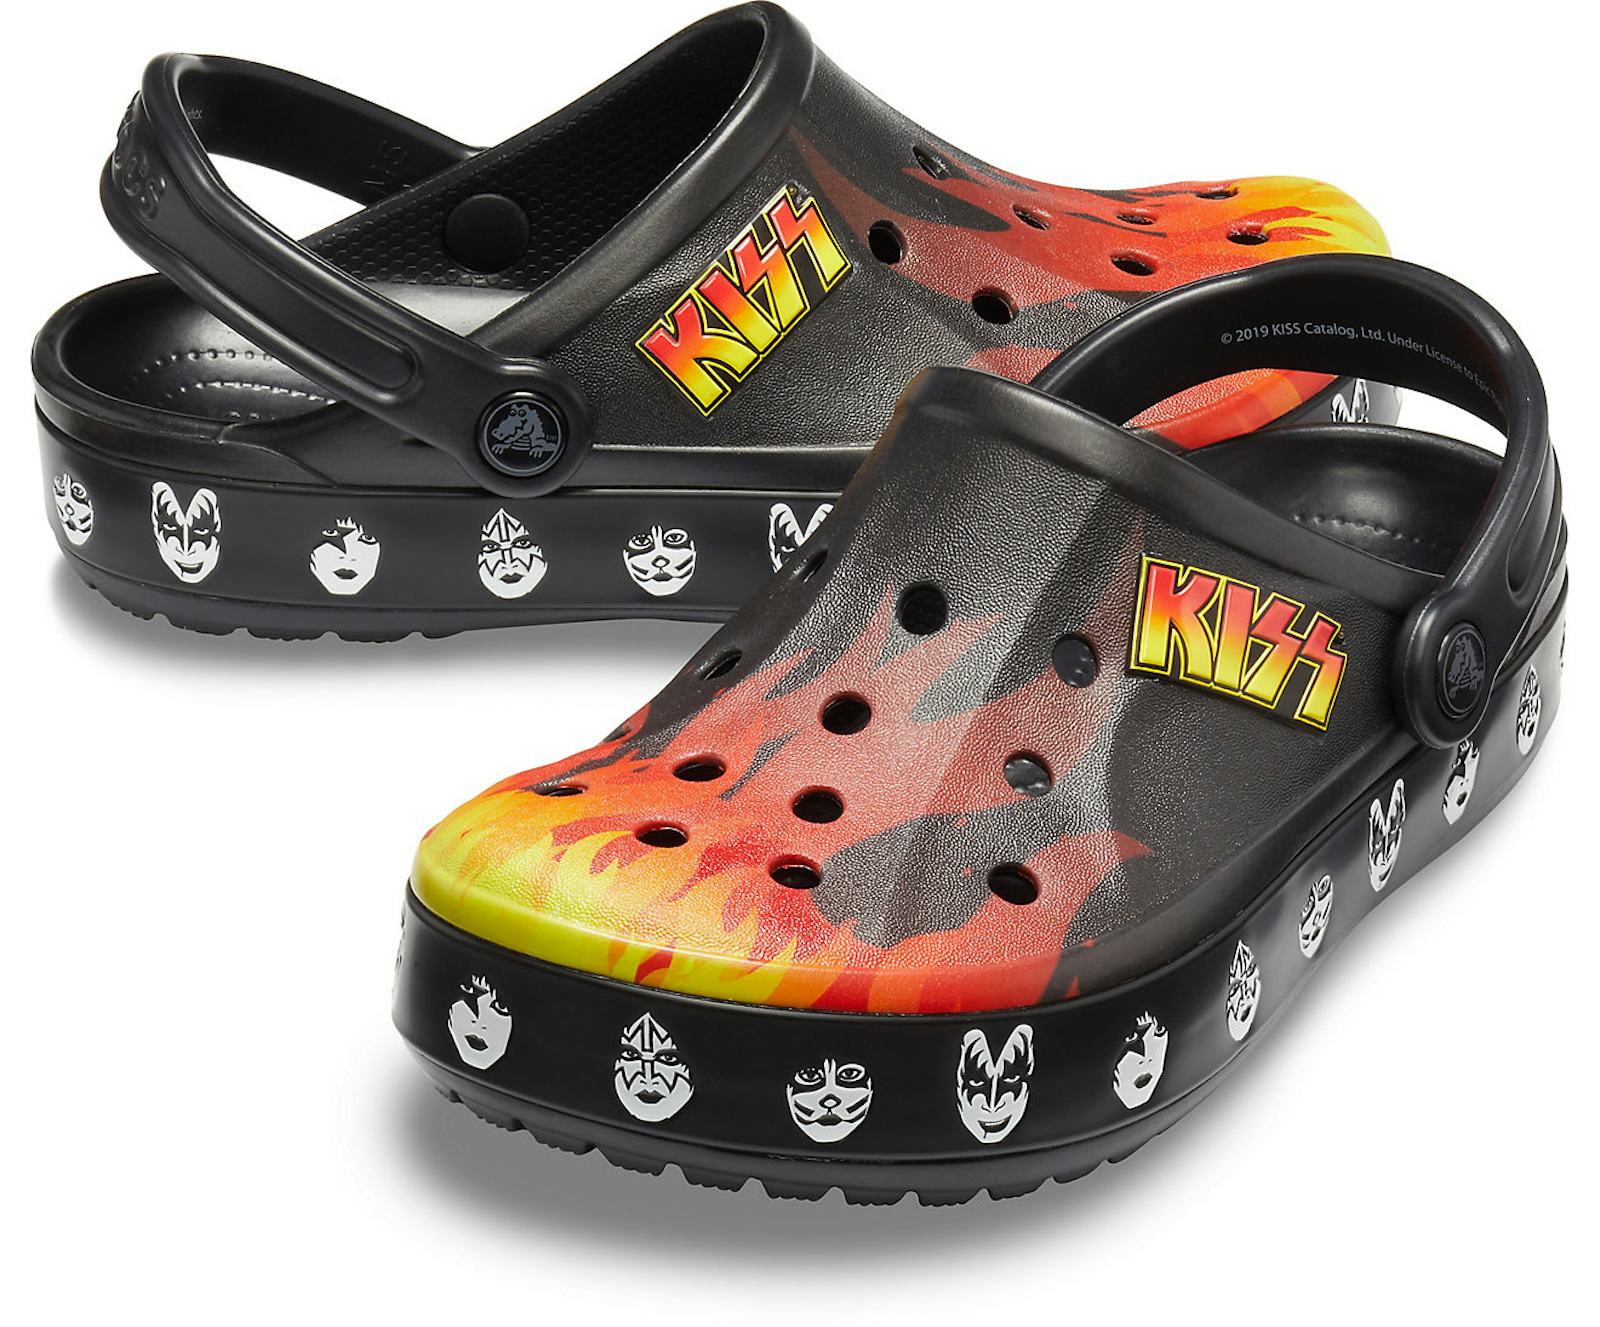 The Crocs x KISS Collab Is A Casual Way To Flex Your '70s Rock Fandom